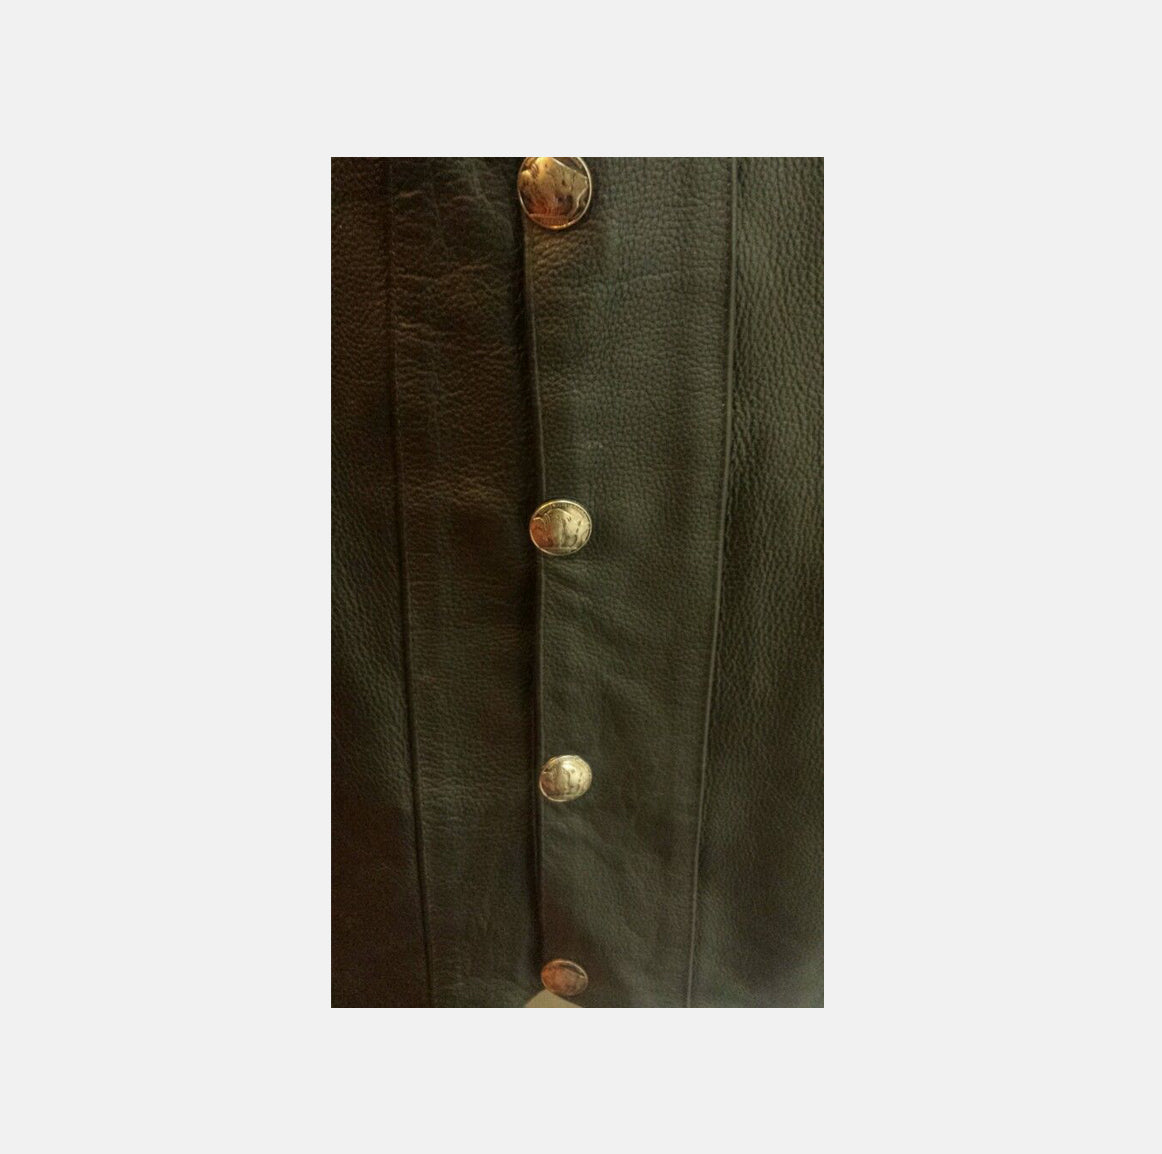 Vest leather quality stuff and buttons